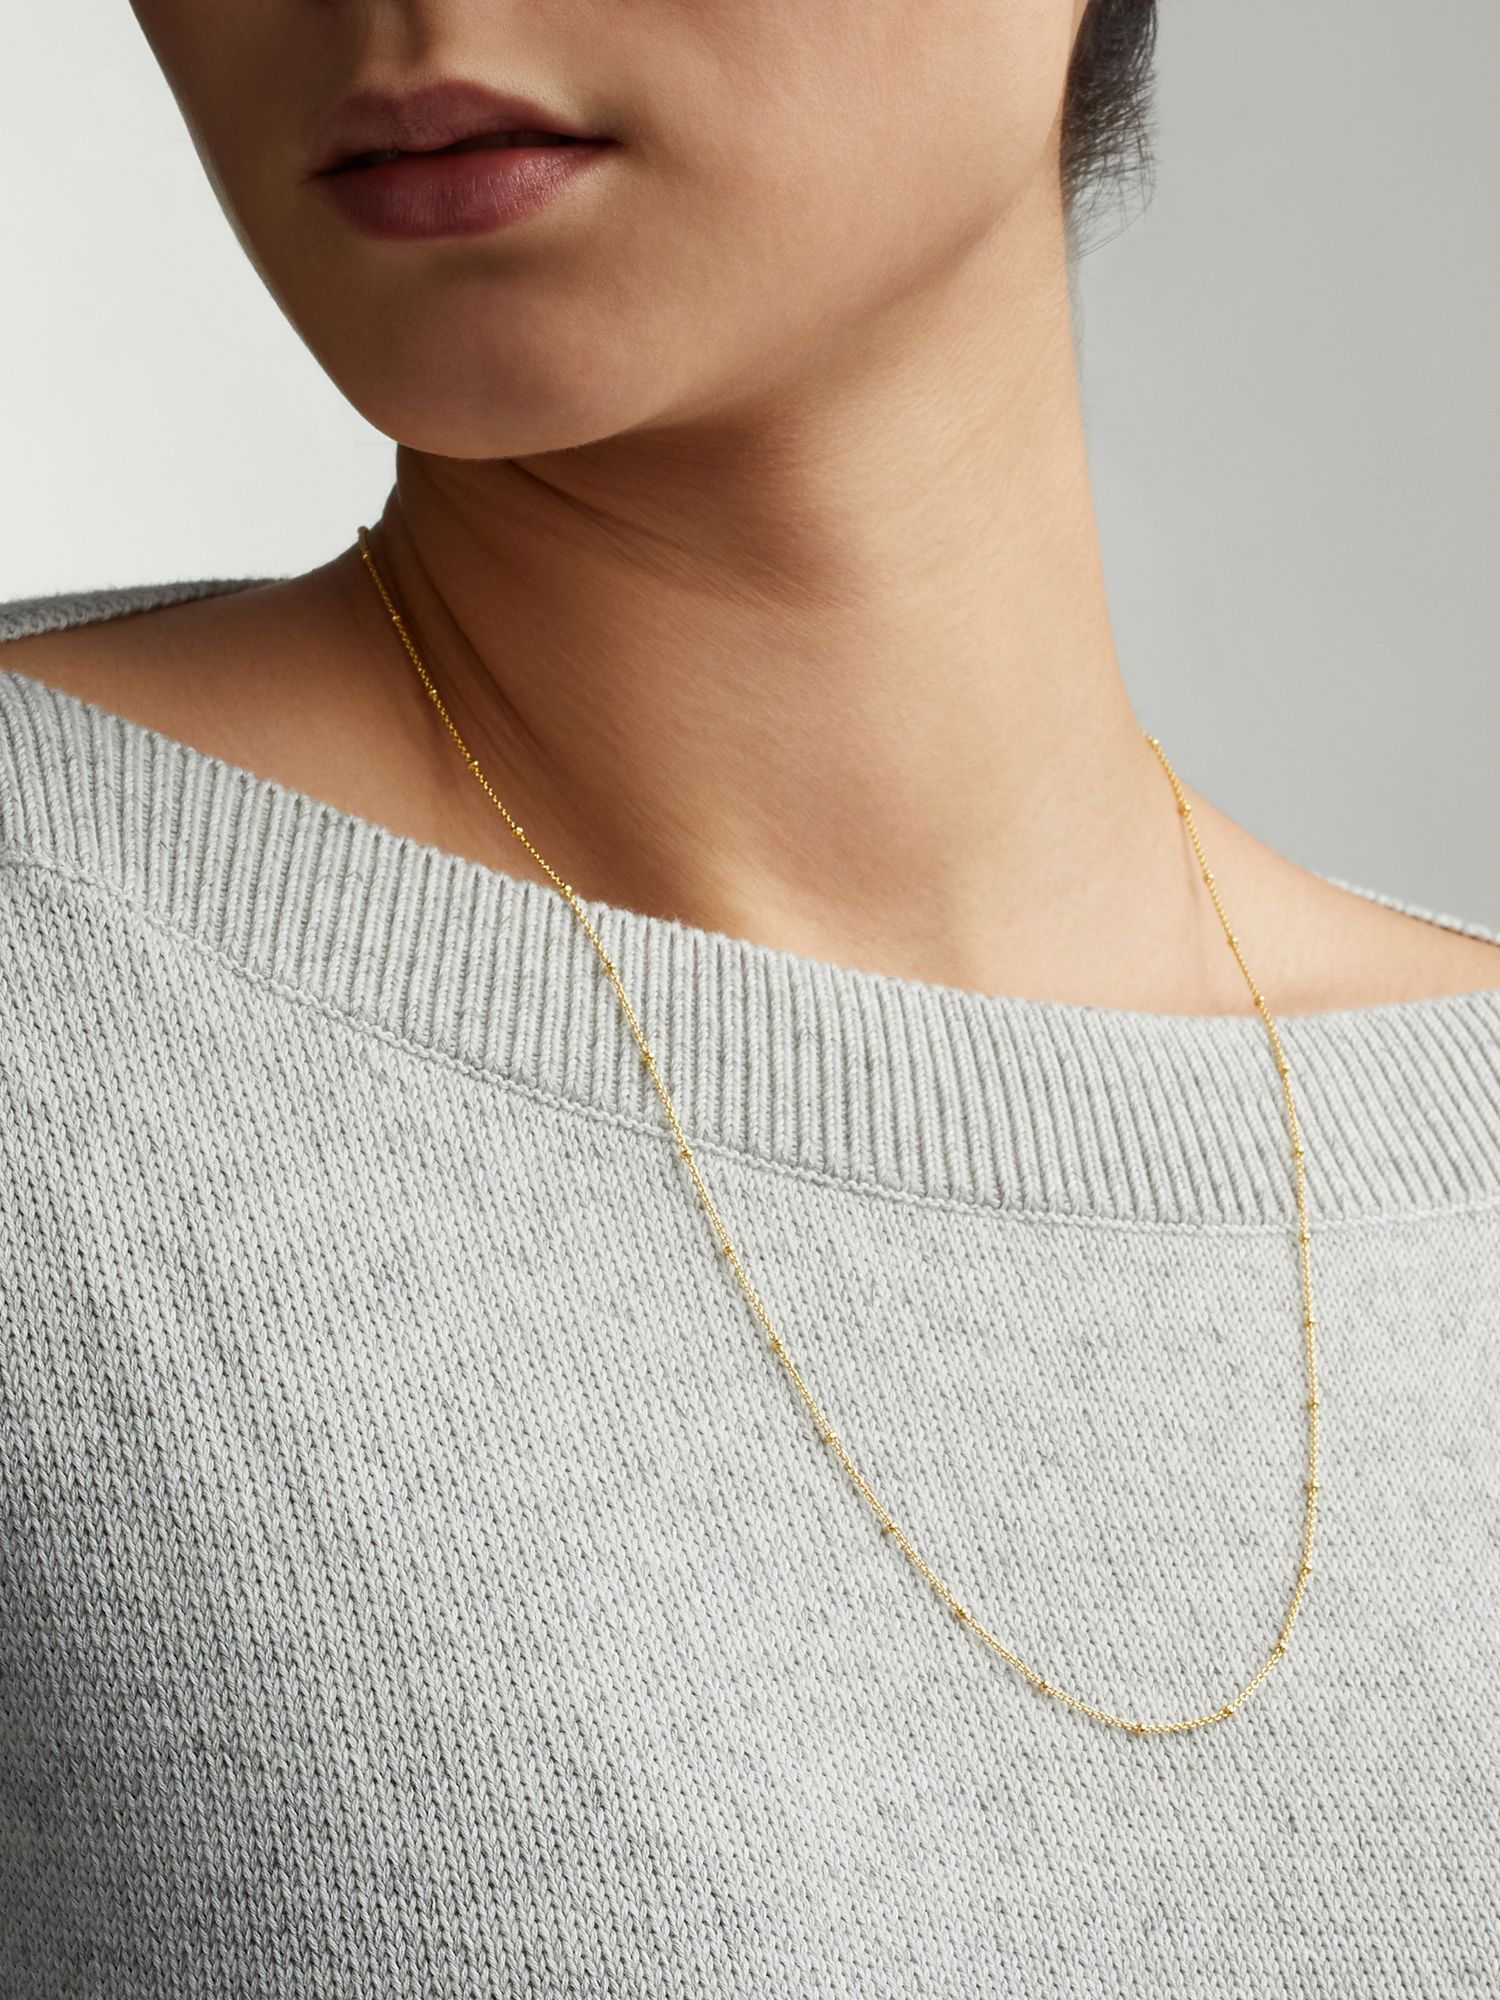 Monica Vinader Fine Beaded Chain Necklace, Gold at John Lewis & Partners